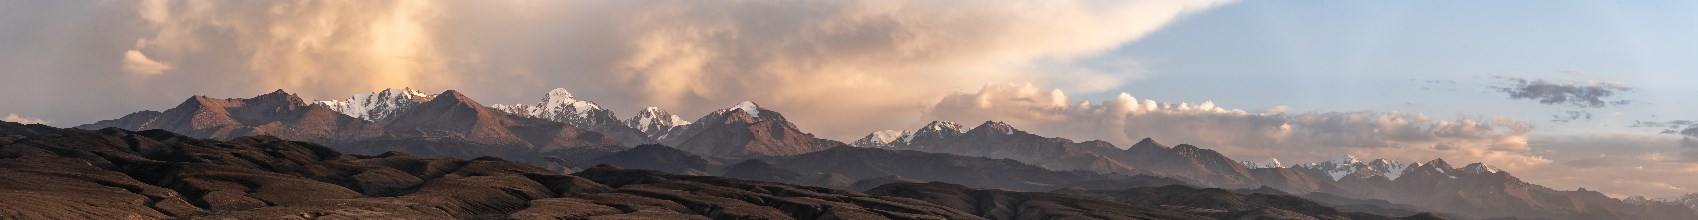 Snow-covered and glaciated mountain peaks at sunset, autumnal hills with brown grass, Issyk Kul,